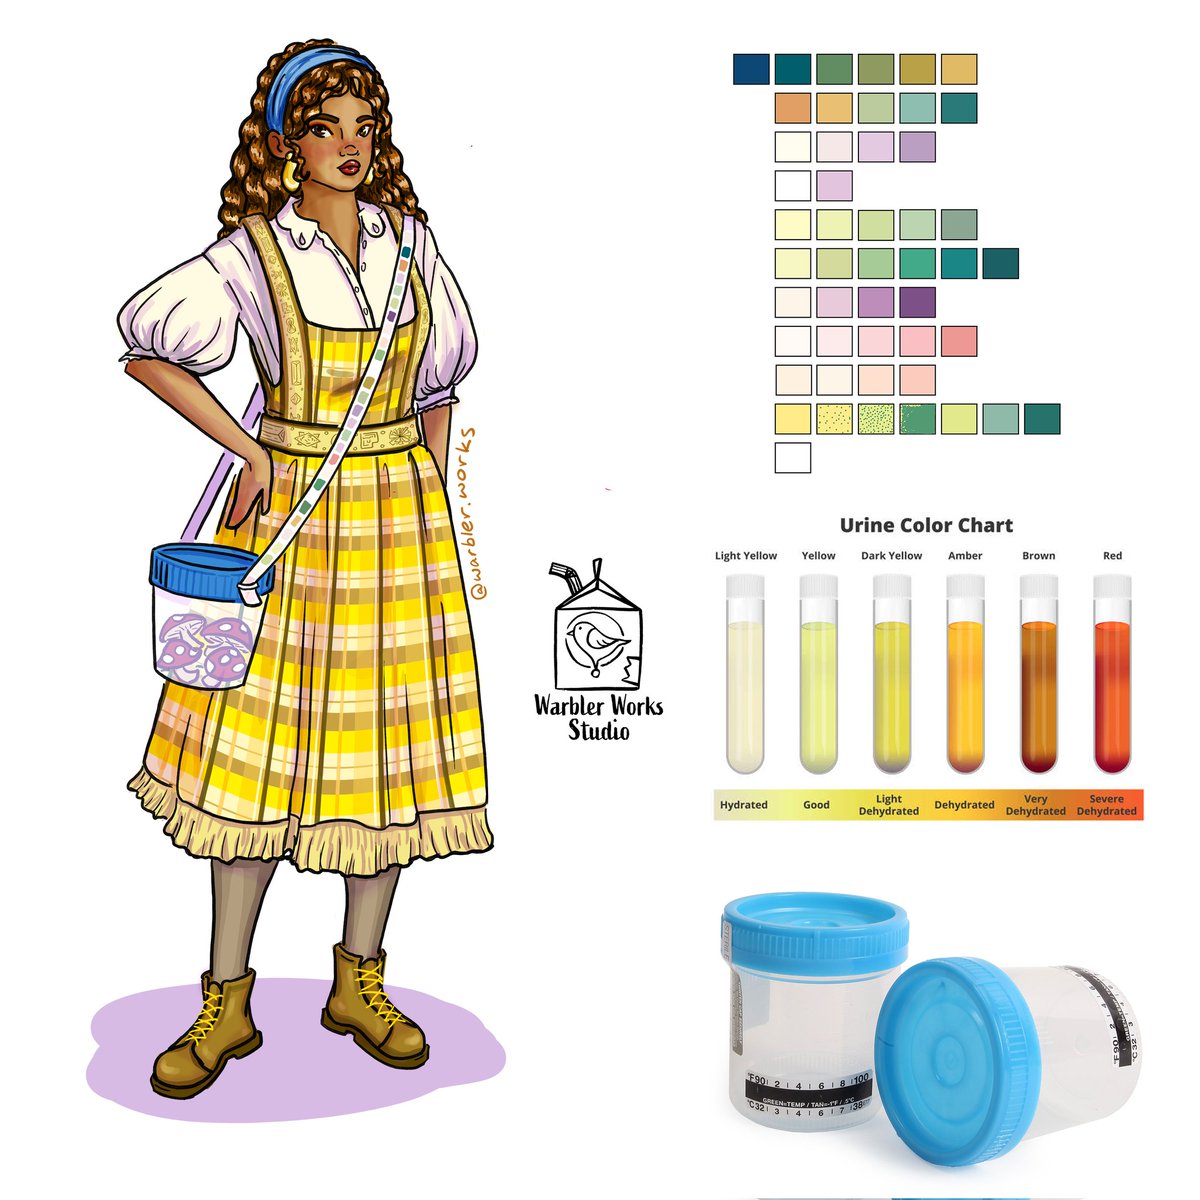 Lab, but make it fashion: Part 14. Urinalysis 
I love how the urine cryastals on her straps and waist came out! 

#medicallaboratoryscientist #labtechproblems #lab4life #lablife #labvocate #loveforlabpros #laboratory #laboratorylife #lab #sciencefashion #labfashion